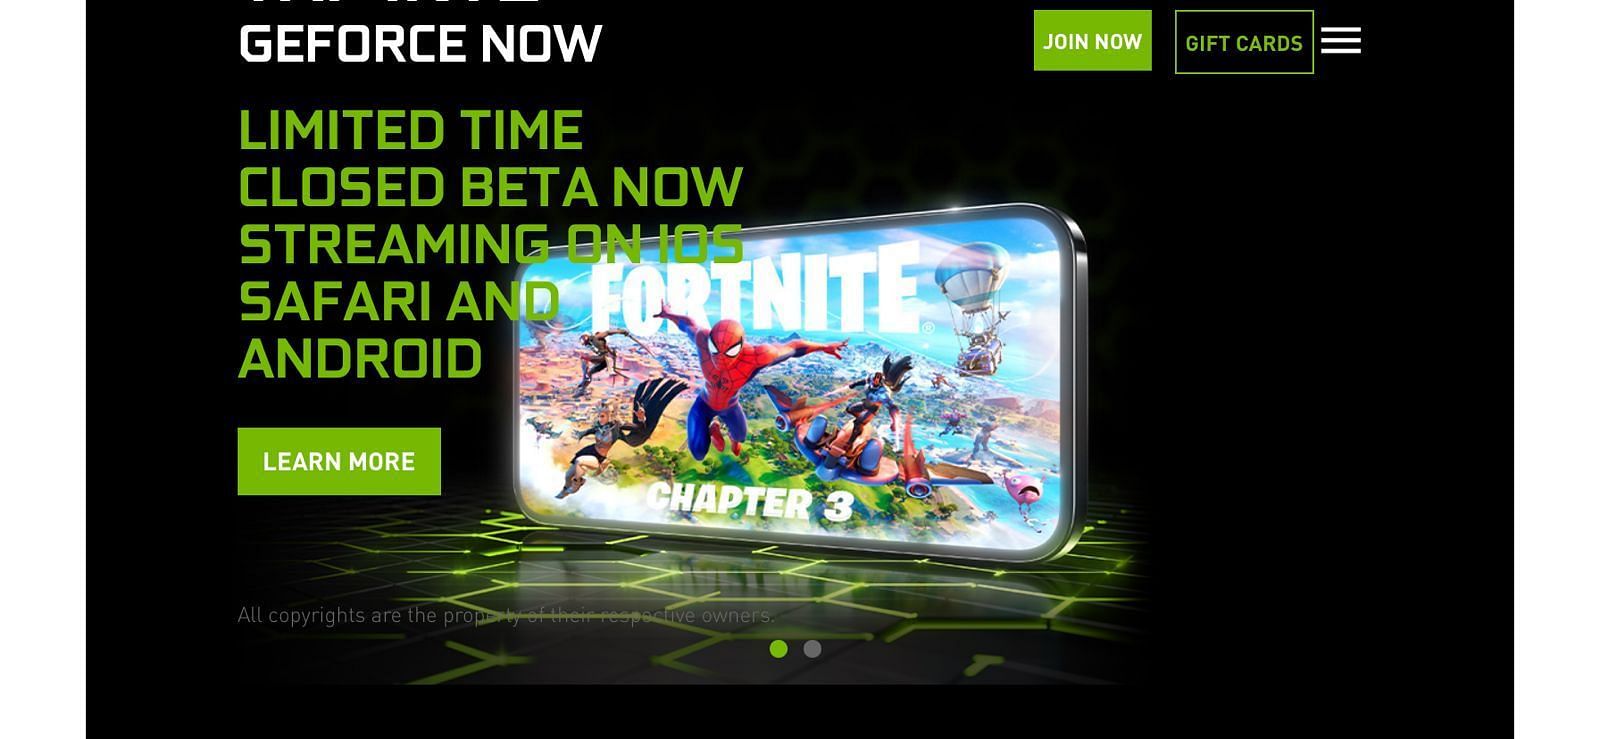 Register into GeForce Now to get access to the closed beta (Image via NVIDIA)